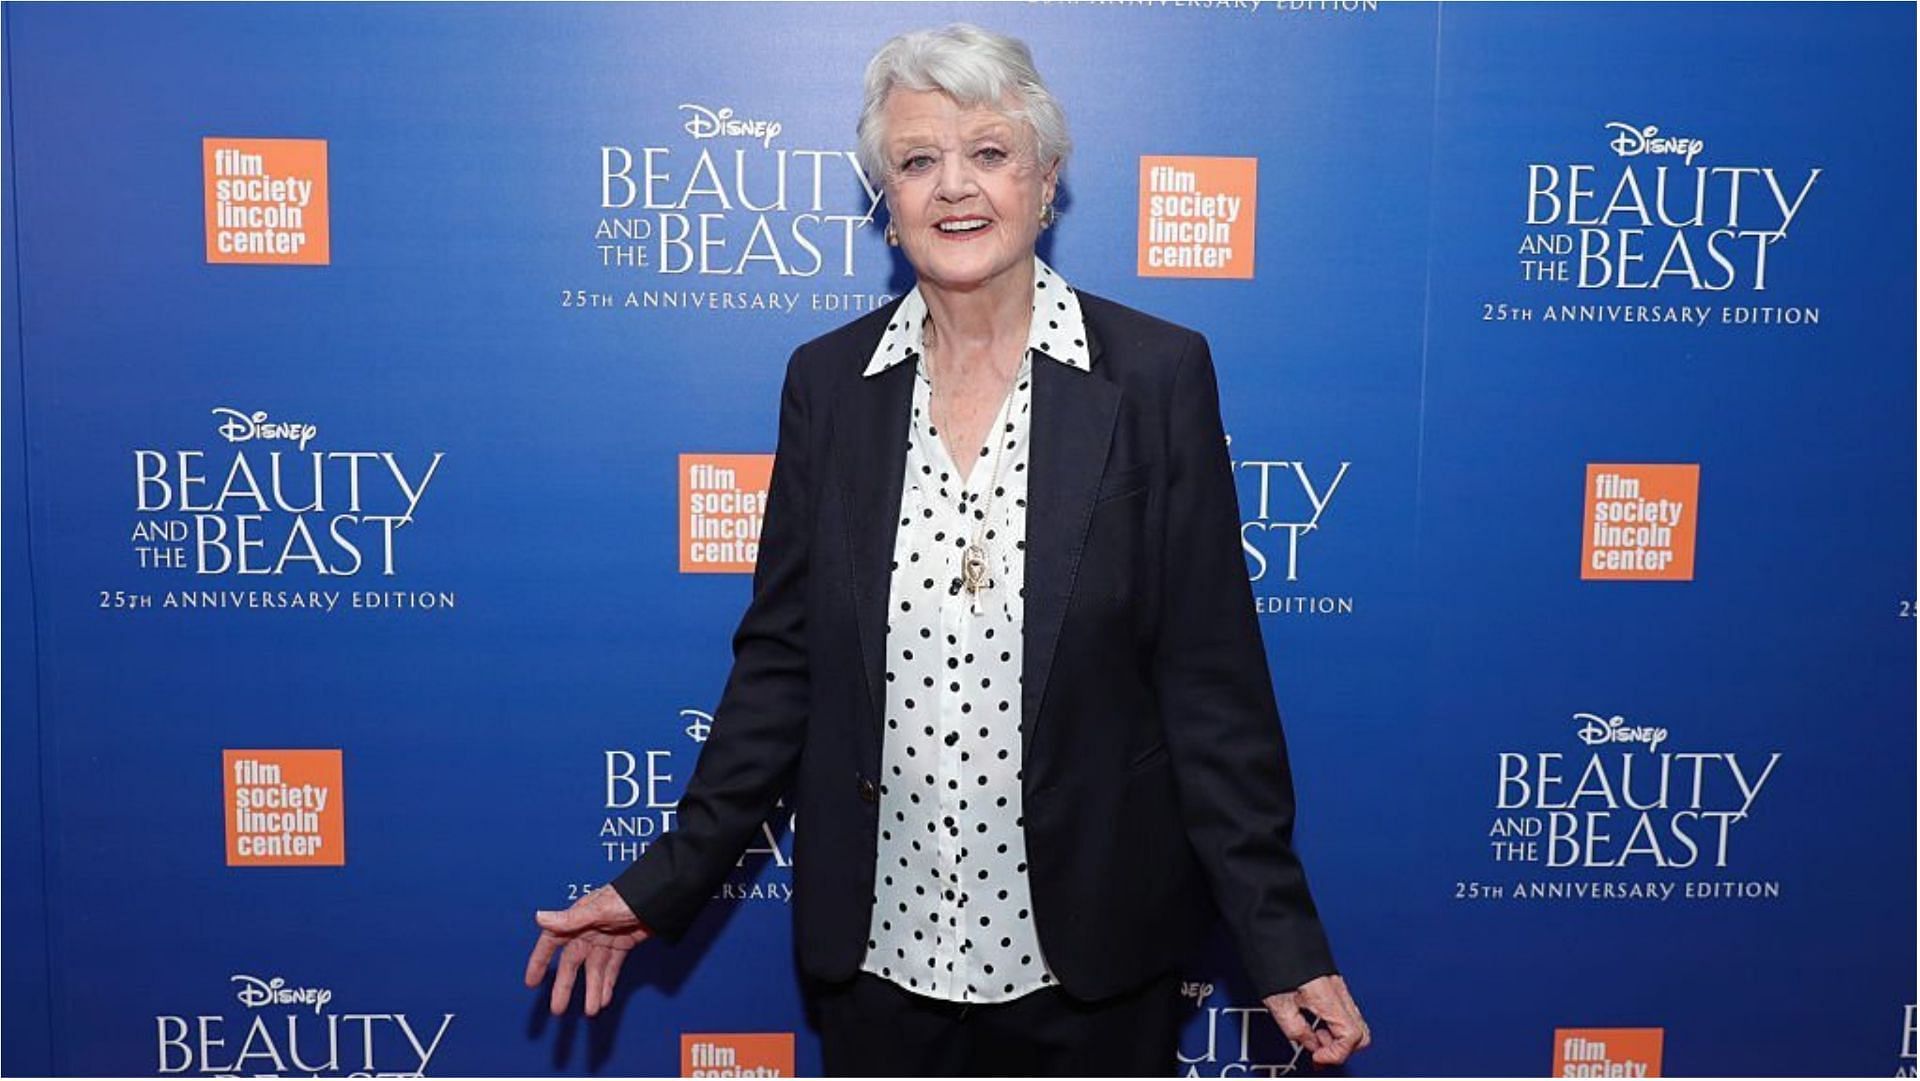 Angela Lansbury appeared in many TV shows and movies (Image via Neilson Barnard/Getty Images)